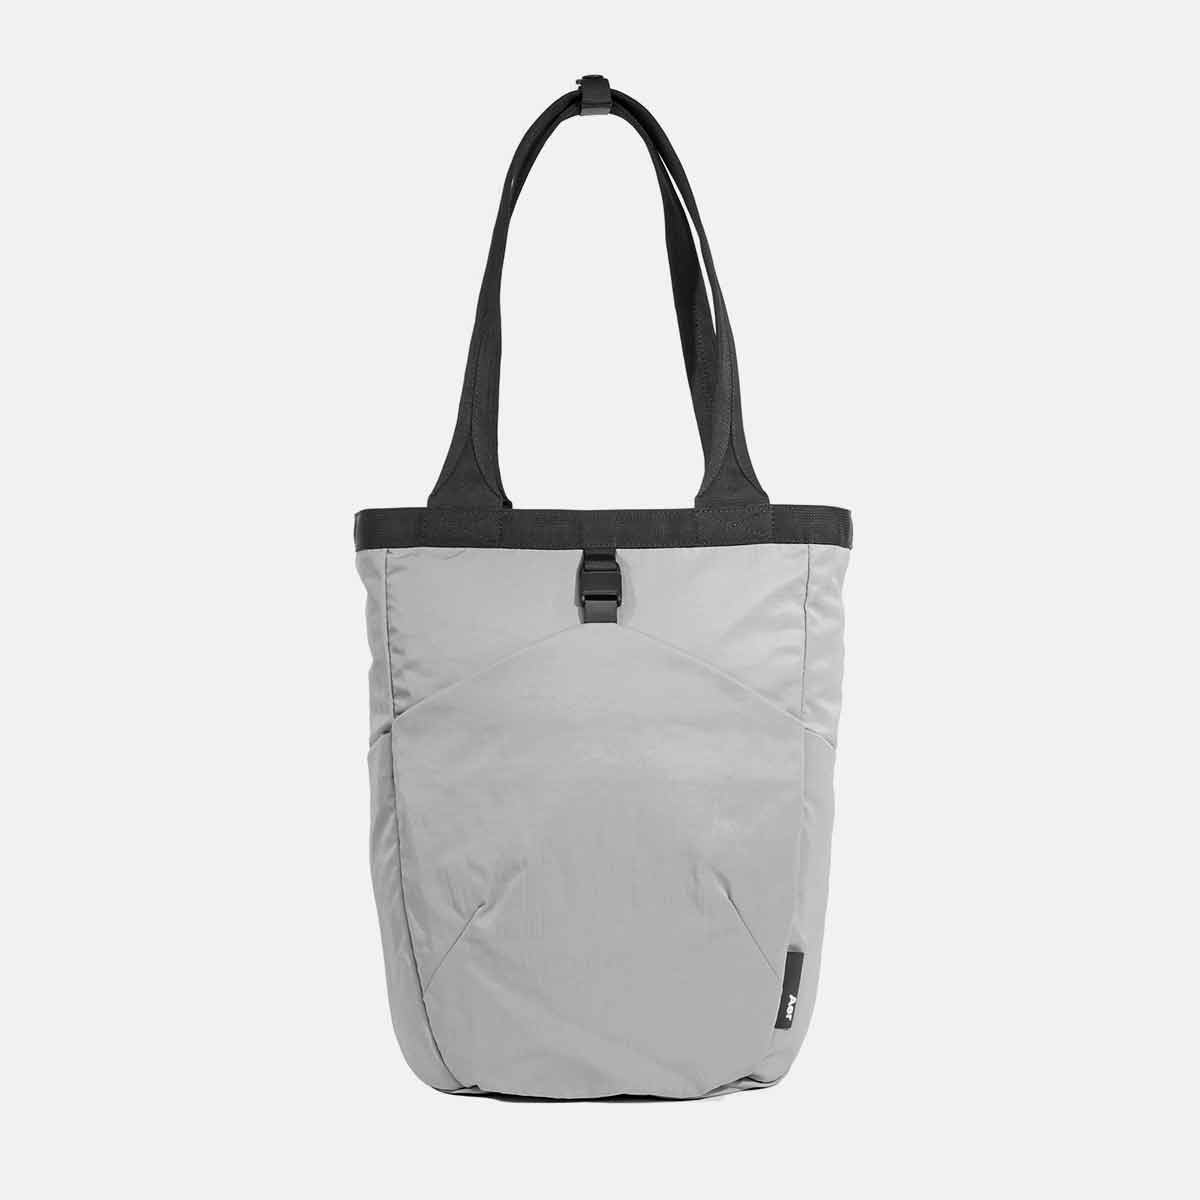 Go Tote 2 Gray | Aer ｜ エアー公式通販サイト